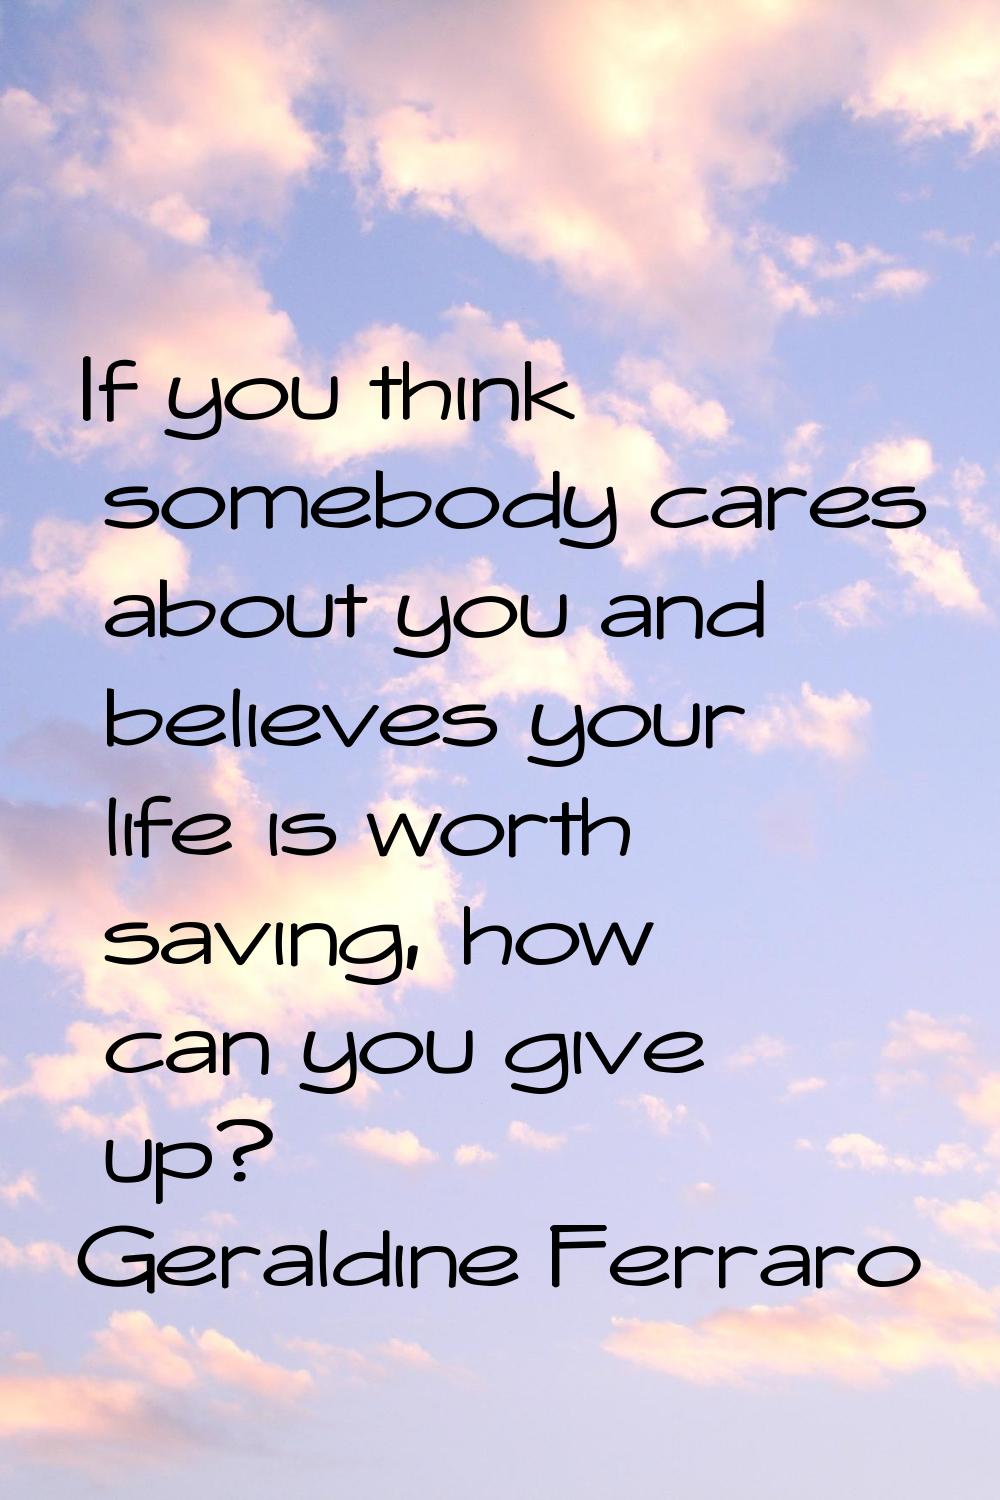 If you think somebody cares about you and believes your life is worth saving, how can you give up?